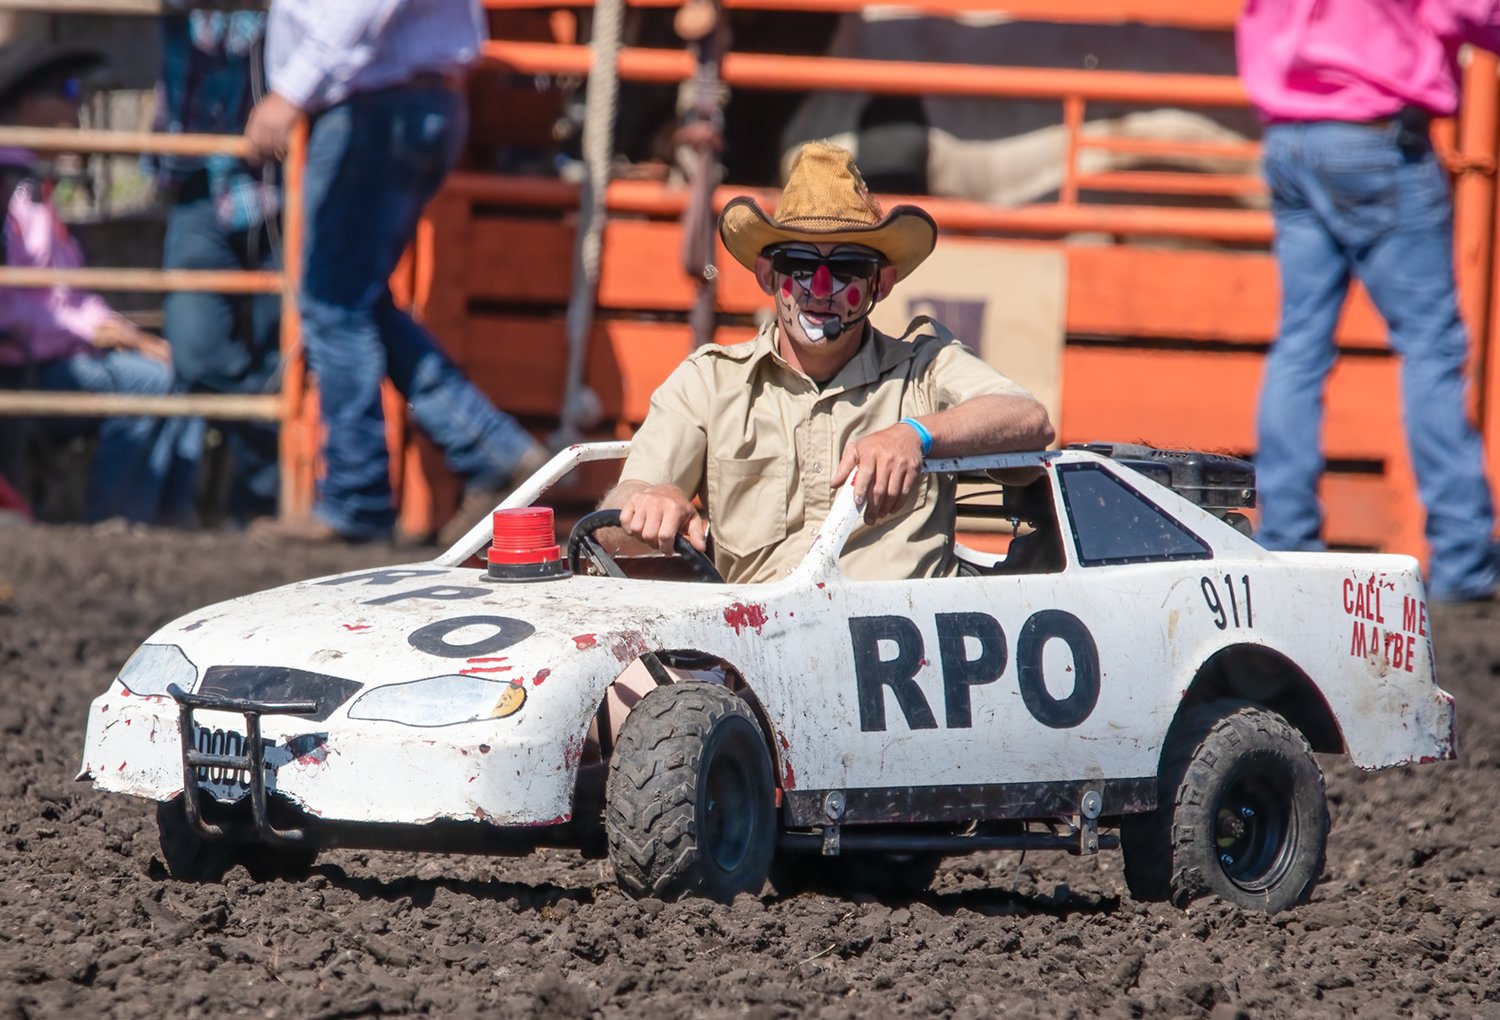 Pro rodeo clown Allan Dessel brought some new routines to the rodeo this year, including a crowd favorite where he unwittingly had his car stolen right behind his back.